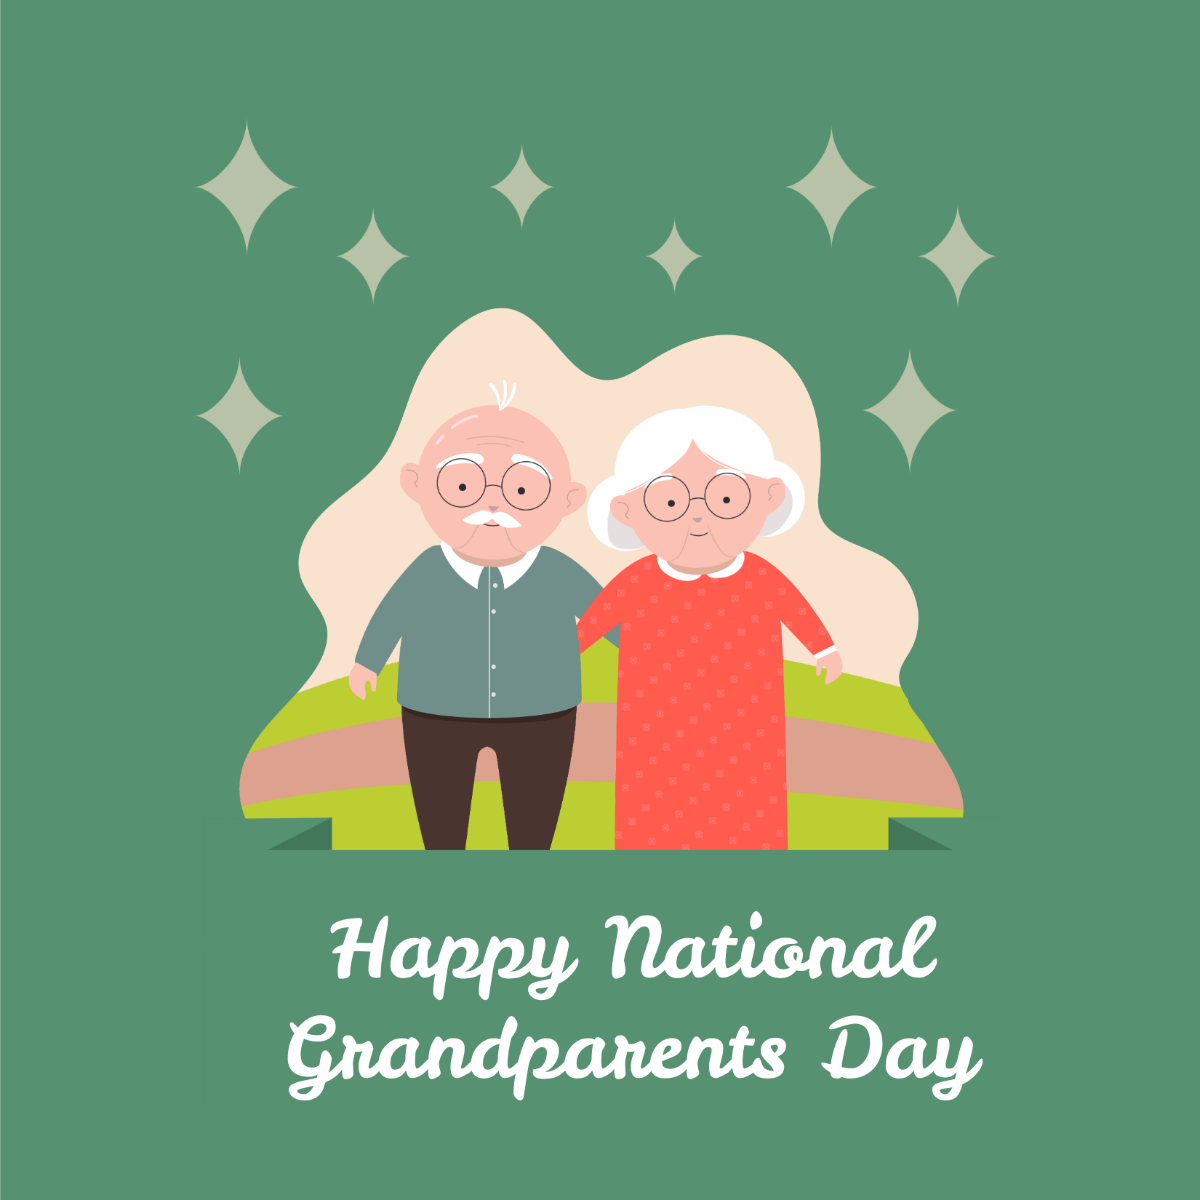 National Grandparents Day Instagram Post Template